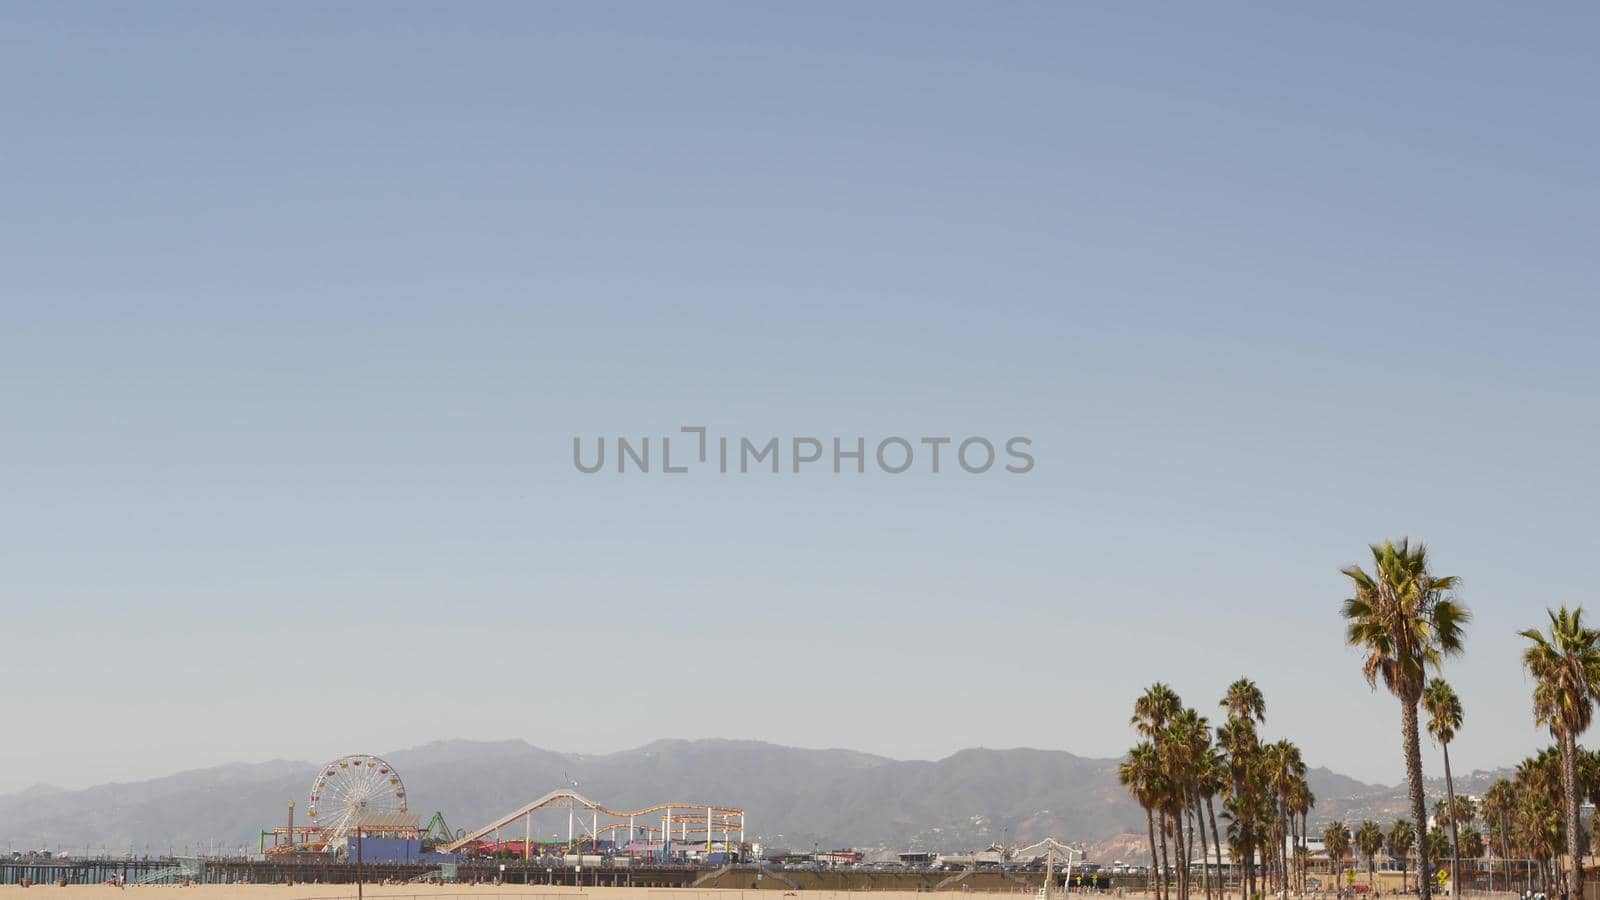 California beach aesthetic, classic ferris wheel, amusement park on pier in Santa Monica pacific ocean resort. Summertime iconic view, palm trees and sky, symbol of Los Angeles with copy space, CA USA by DogoraSun